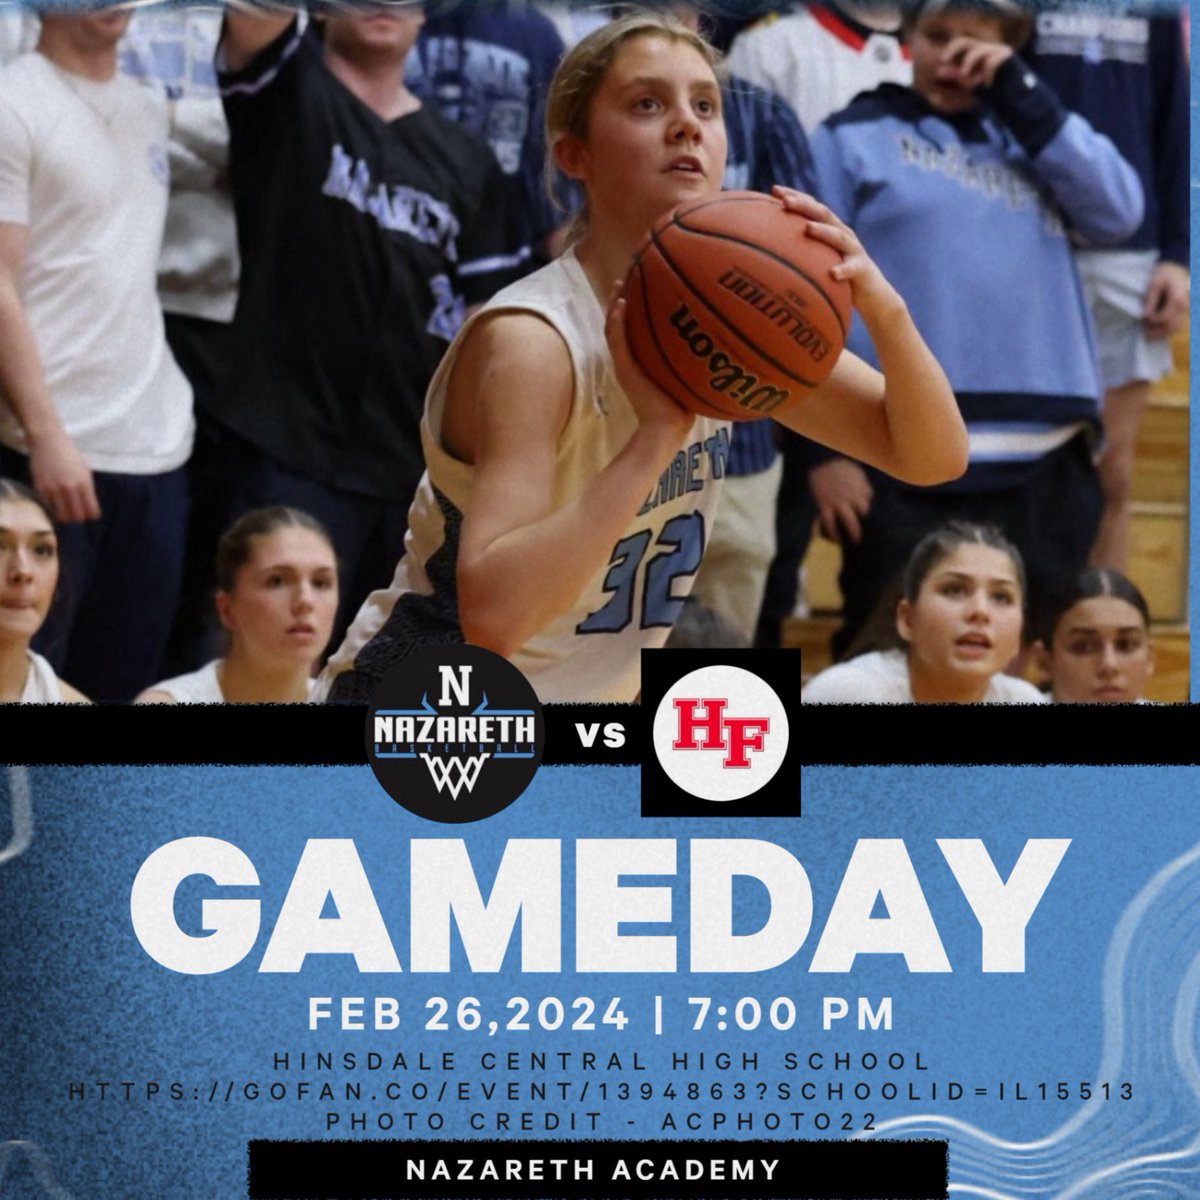 🚨🚨GAME DAY 🚨🚨 🏀Nazareth vs HF ⏱️7:00PM 📍 Hinsdale Central High School 🎟️ gofan.co/event/1394863